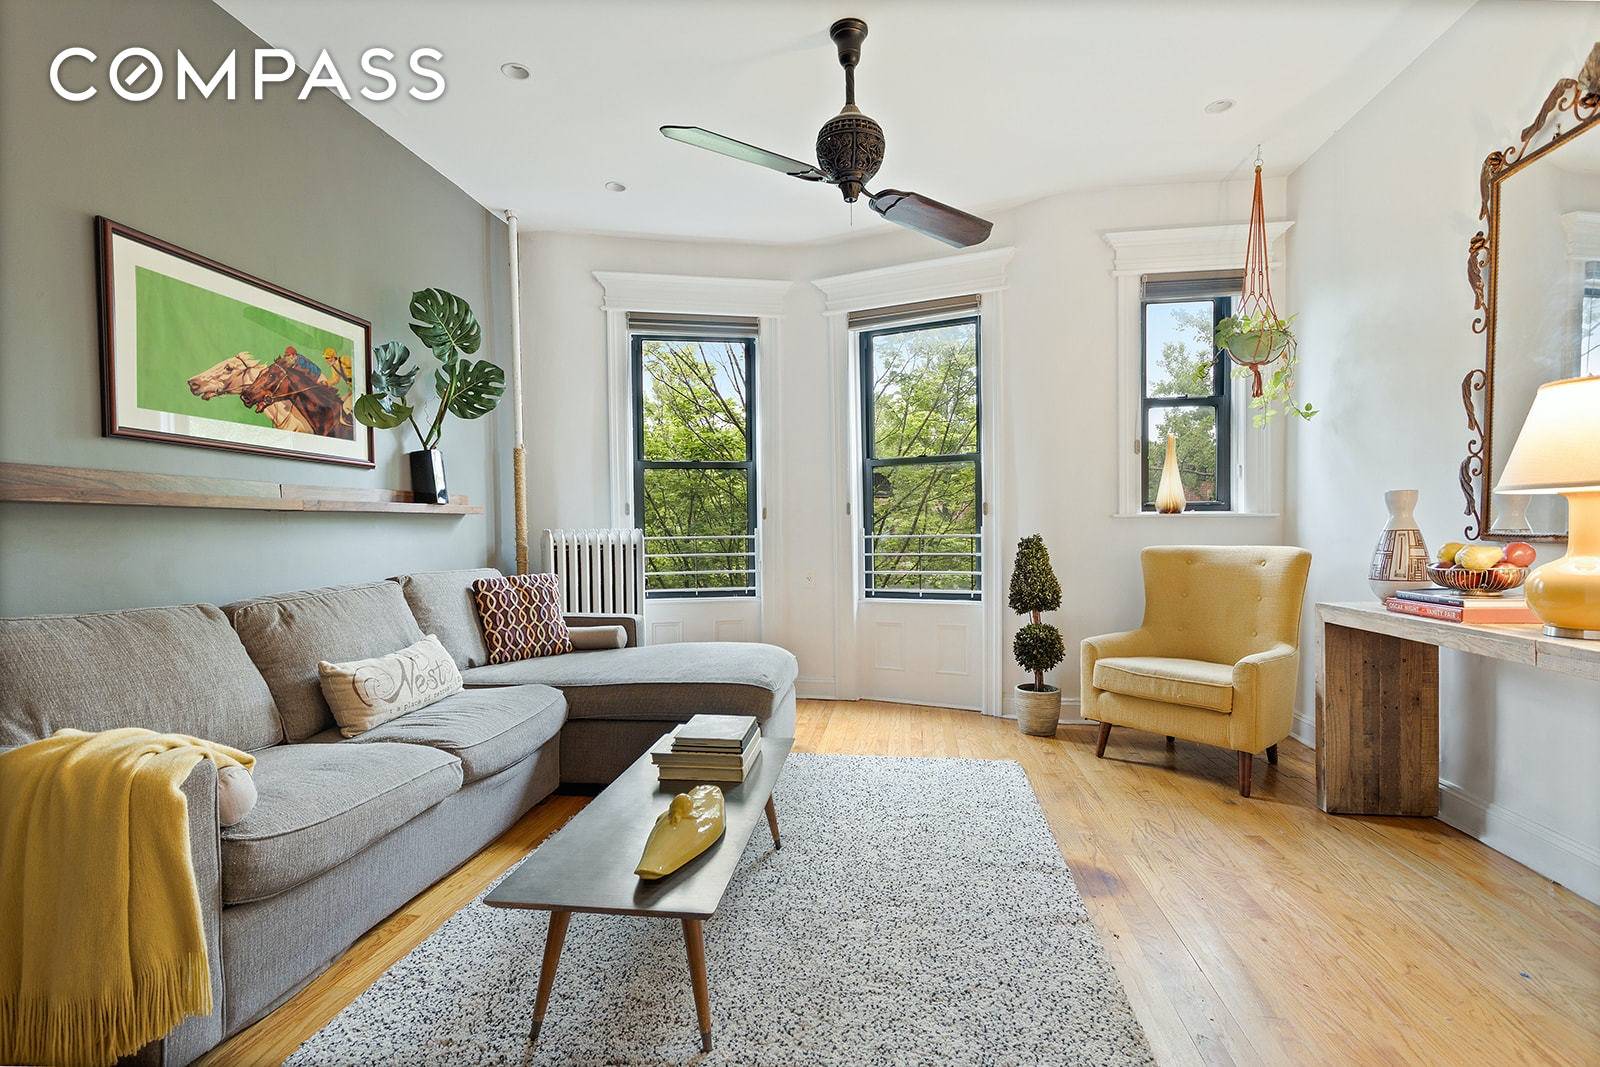 Offer Just Fell Trough. Price Reduced 50K on this Park Slope Classic.